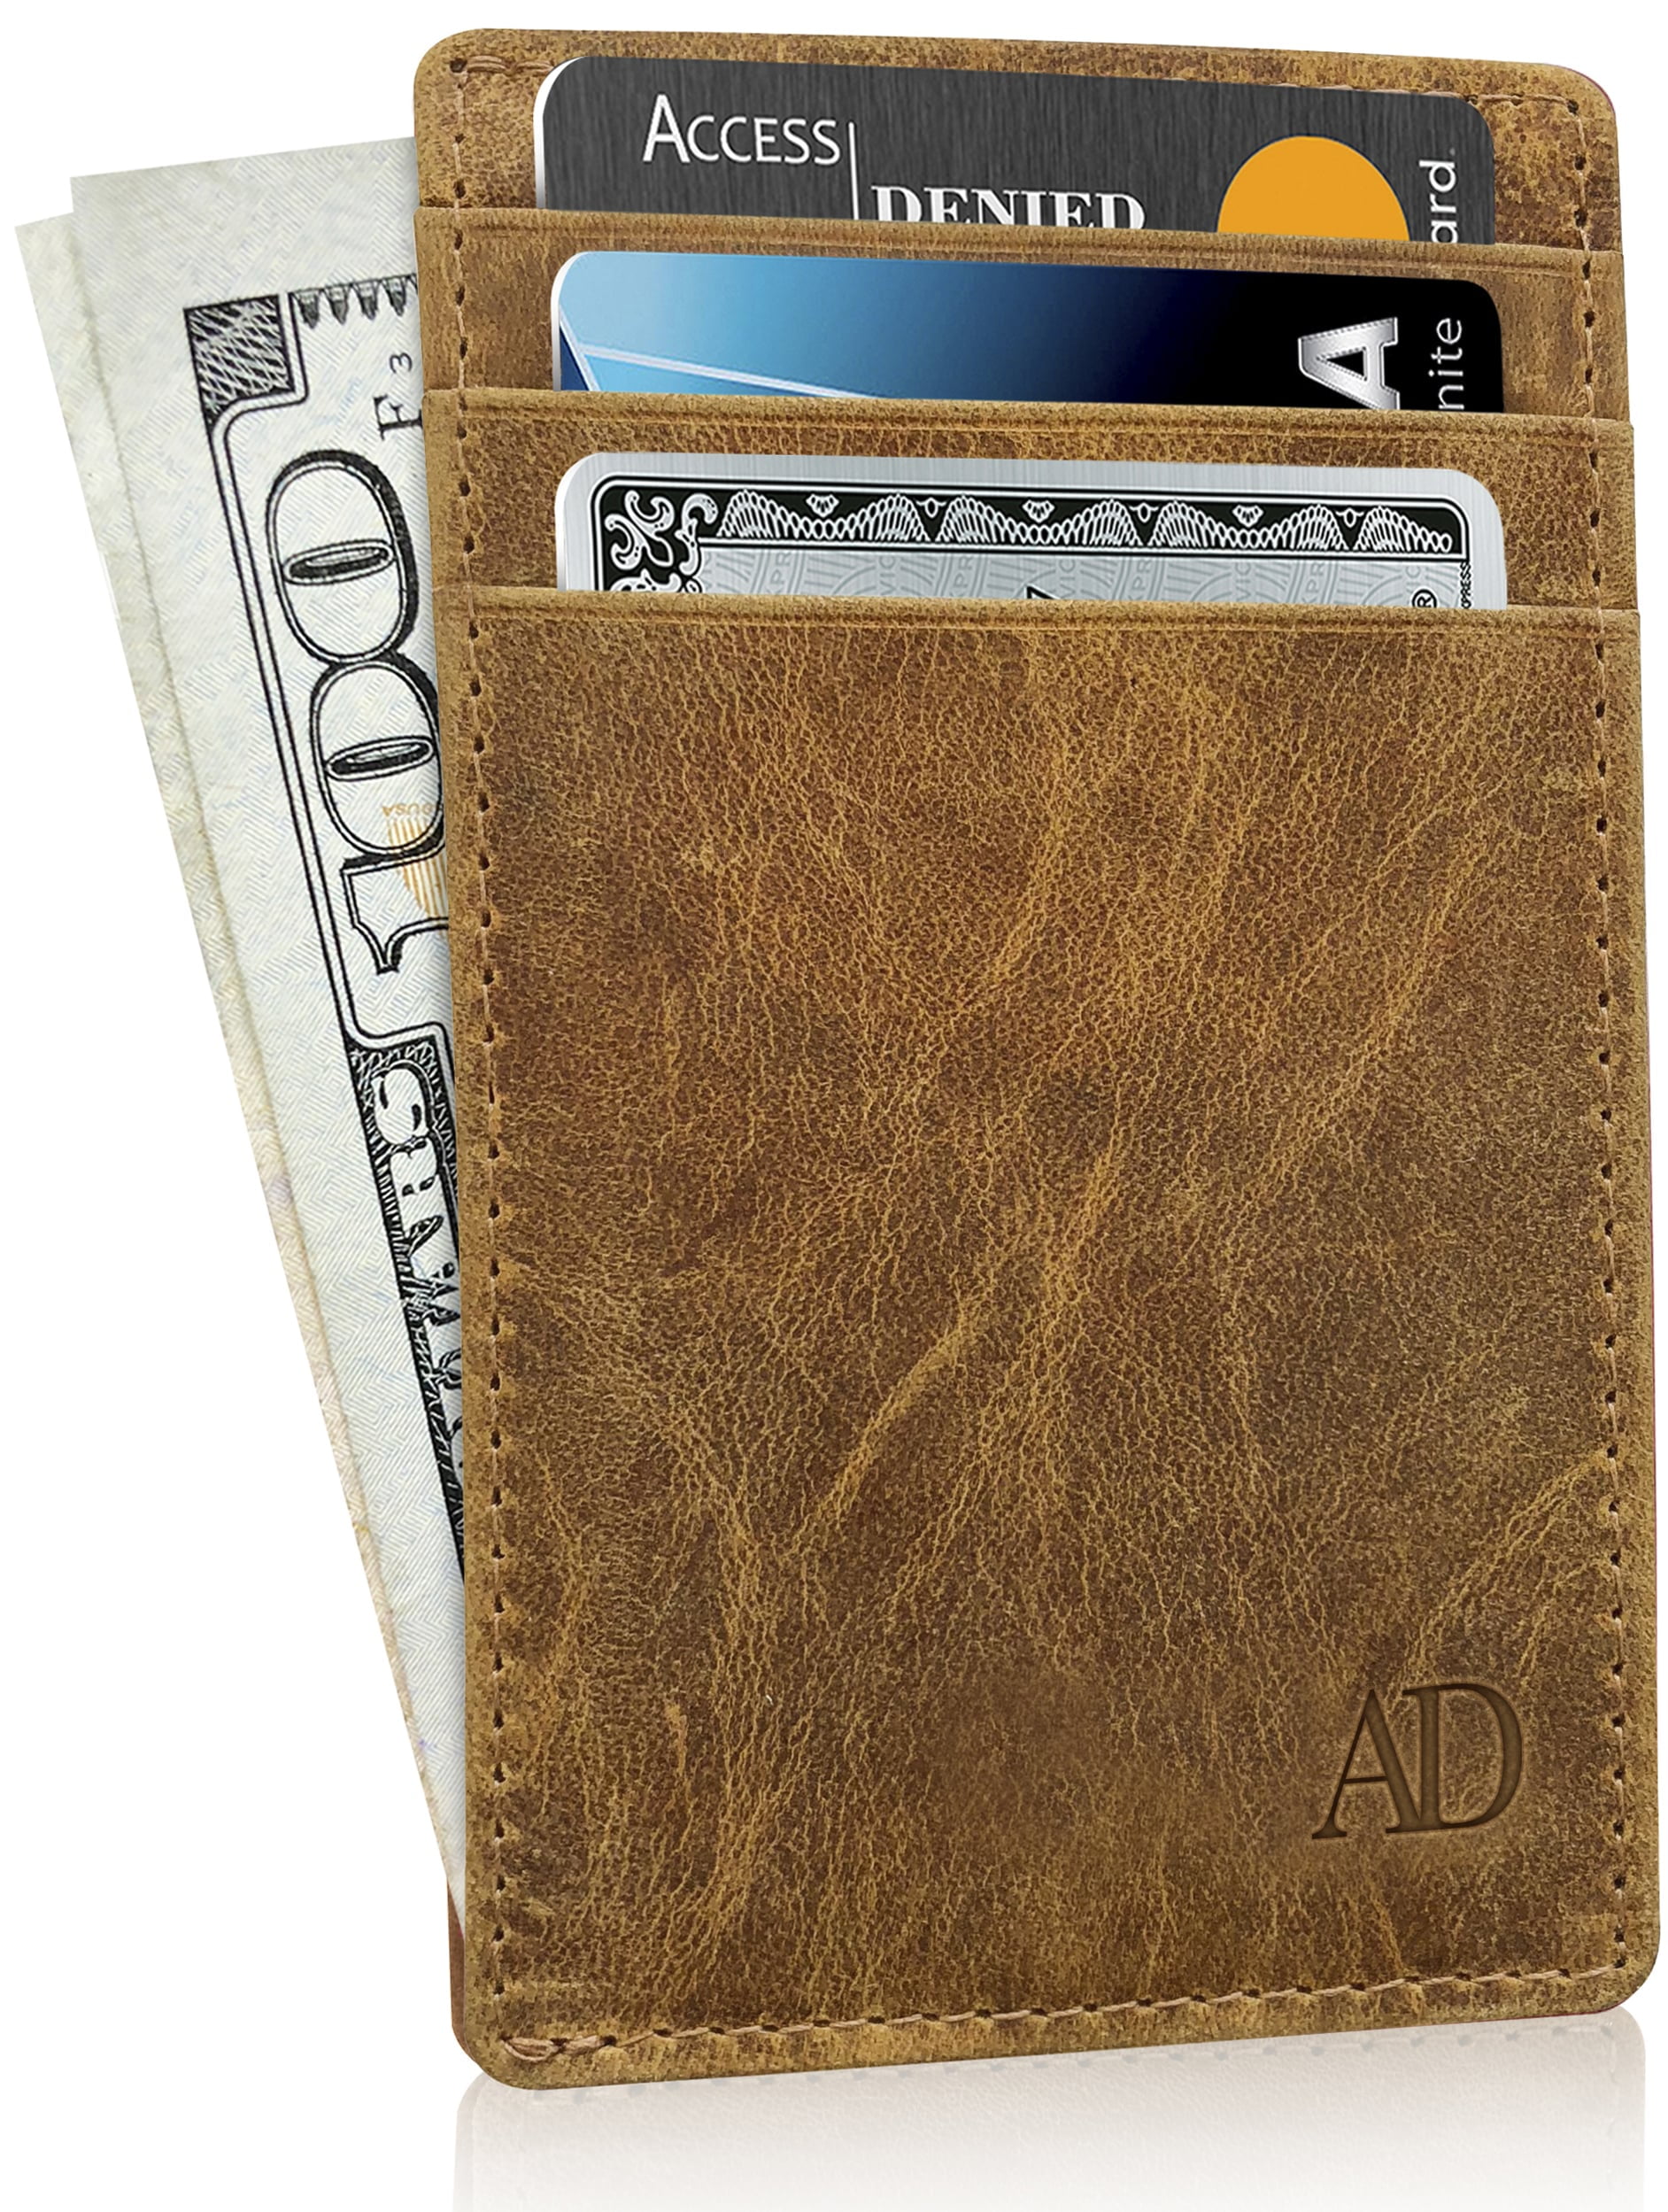 Minimalist Leather RFID Long Wallet Men Slim Cards Tickets Holder Purse to Son